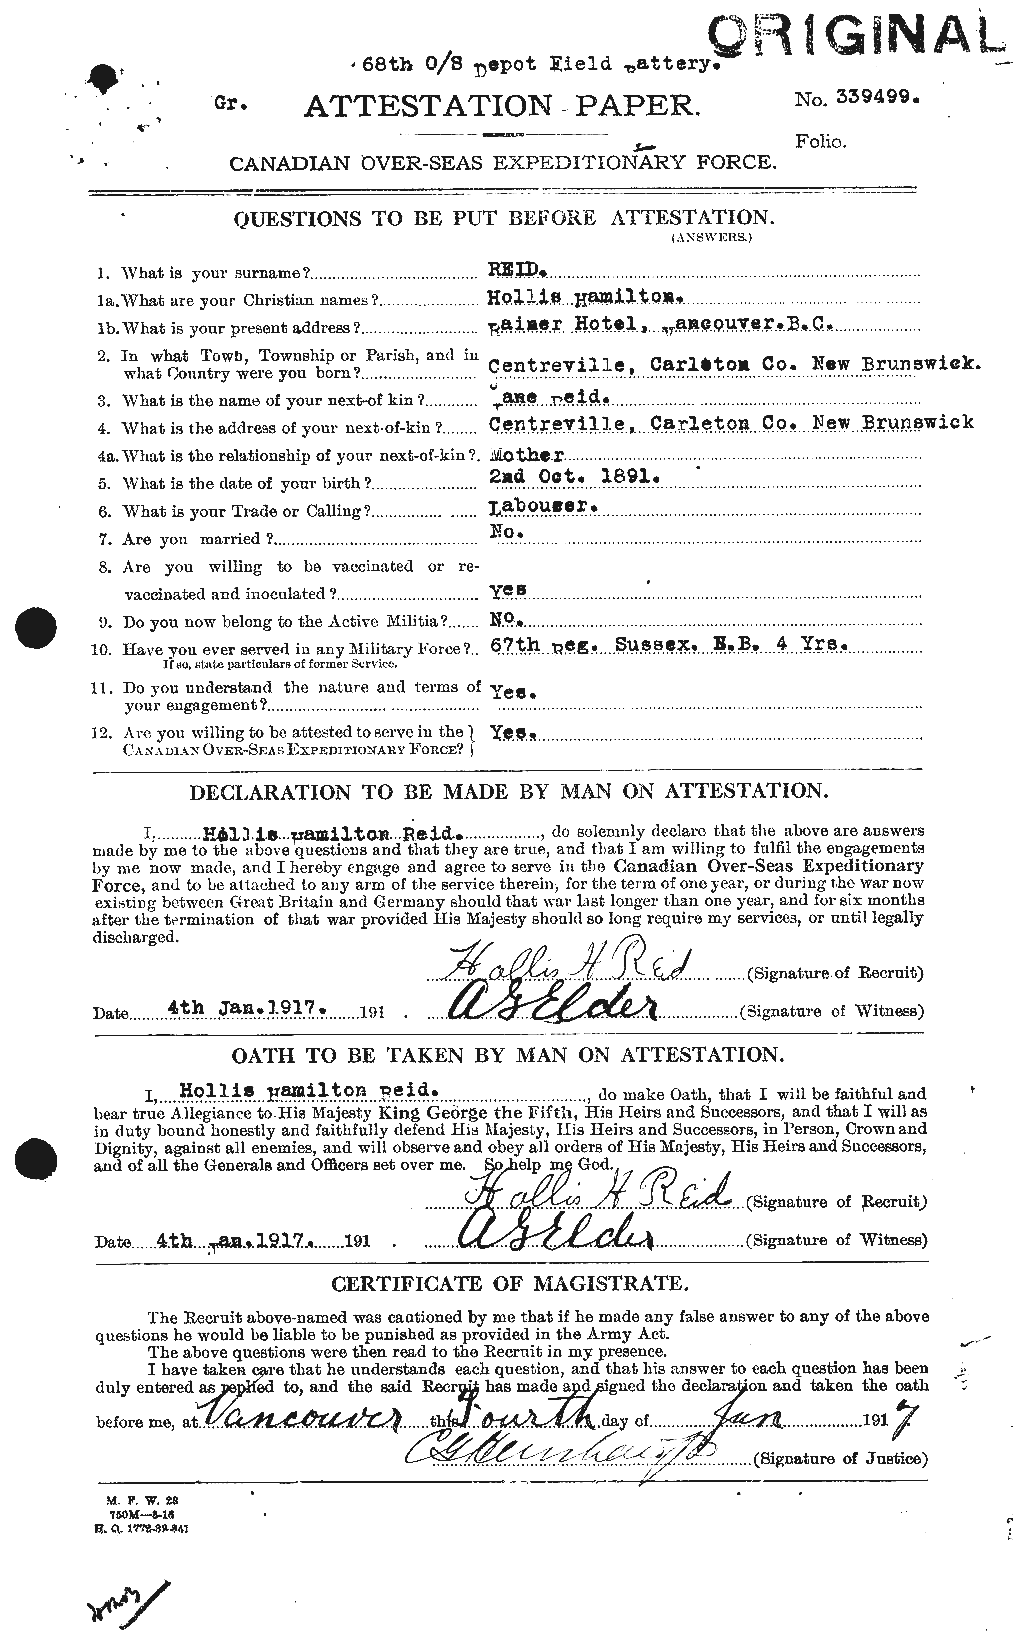 Personnel Records of the First World War - CEF 598611a